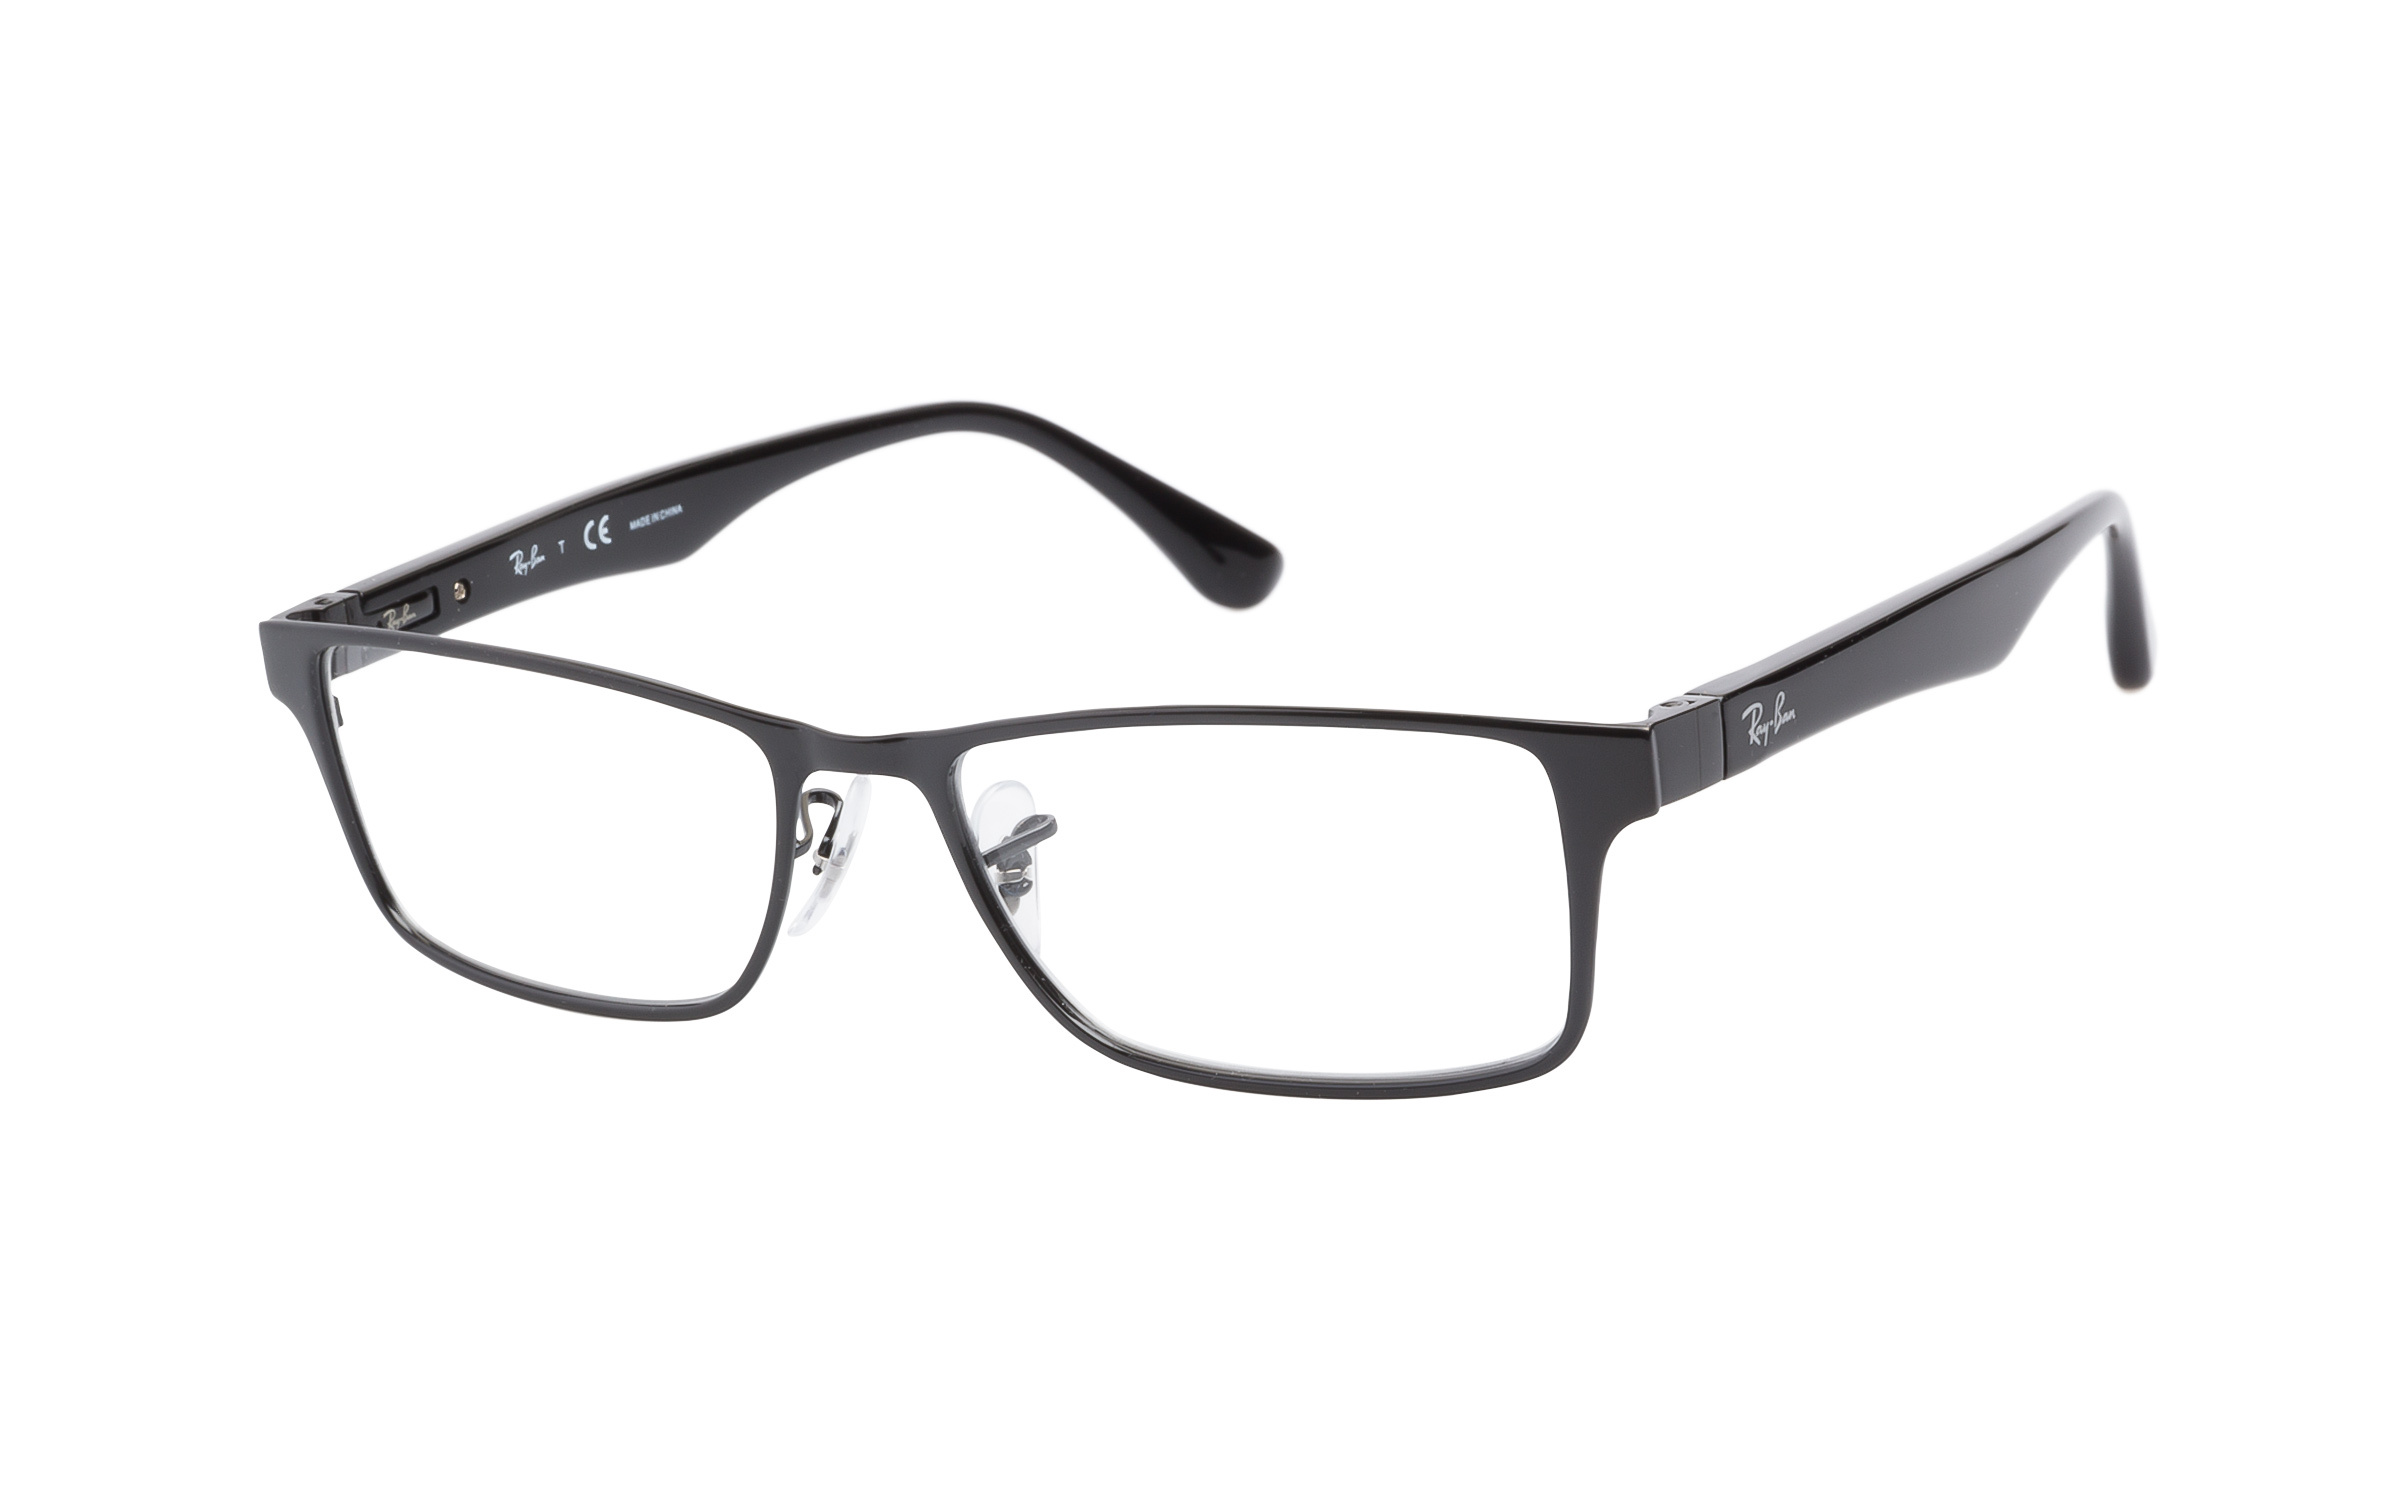 Ray-Ban RB6238 Glasses | Clearly Canada